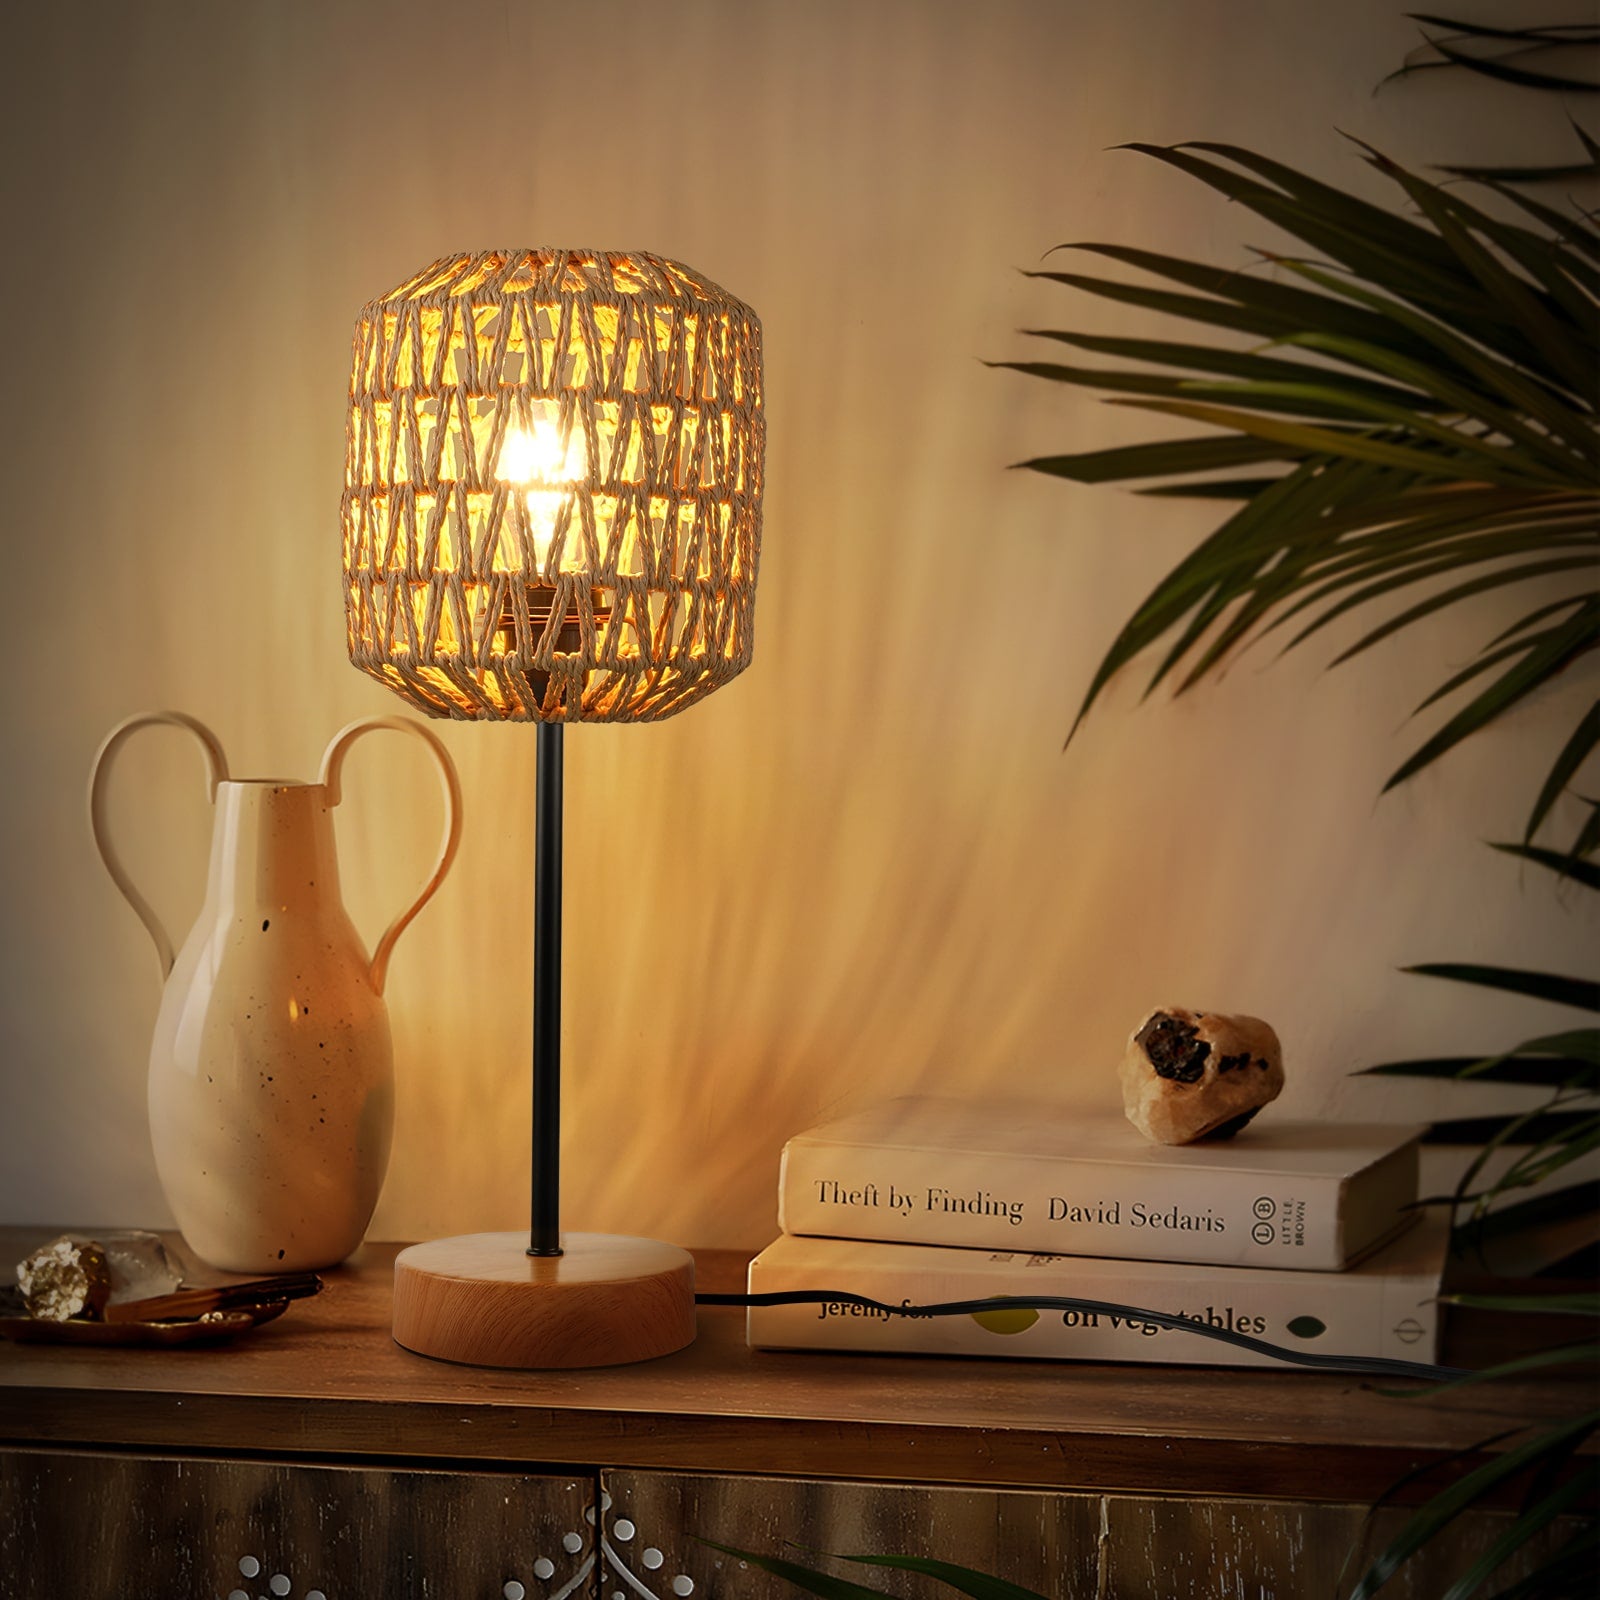 N02 Rustic Rattan Table Light with Handmade Woven Shade for Living Room